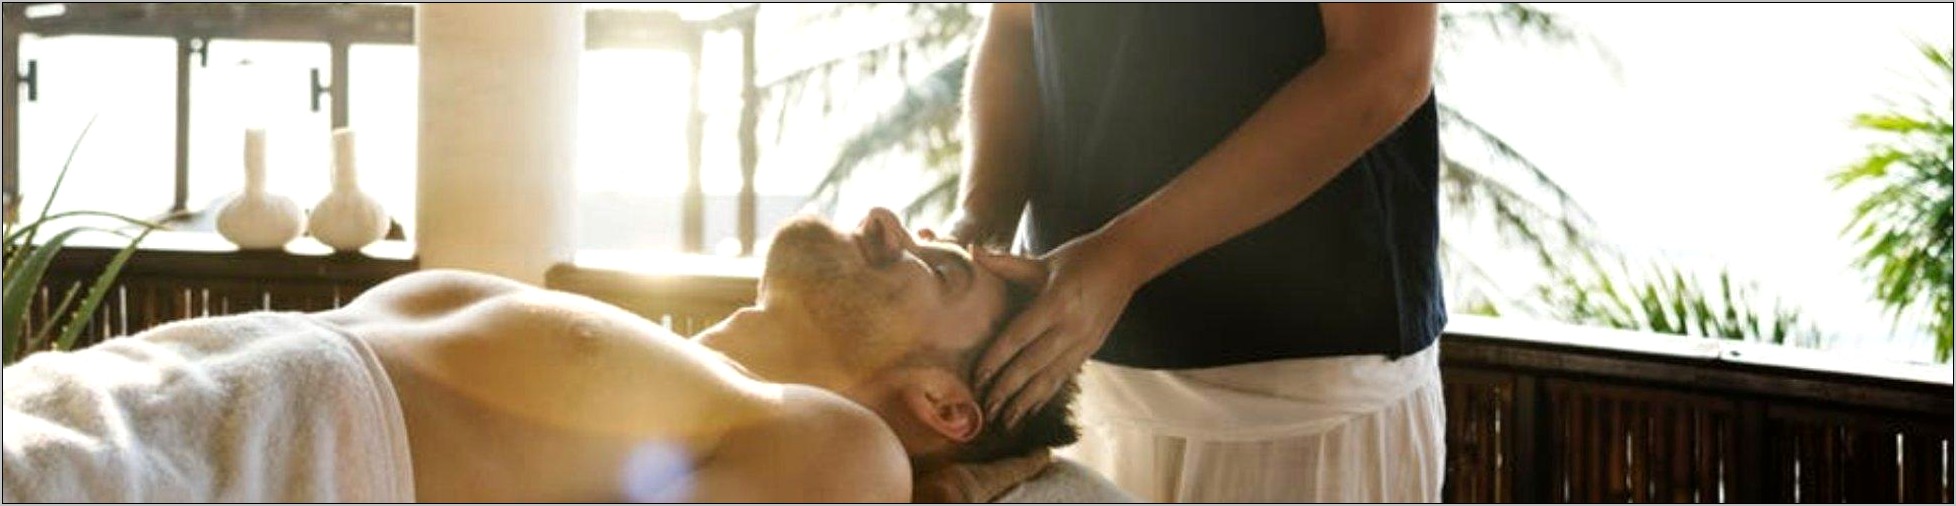 Example Of Functional Resume Massage Therapist